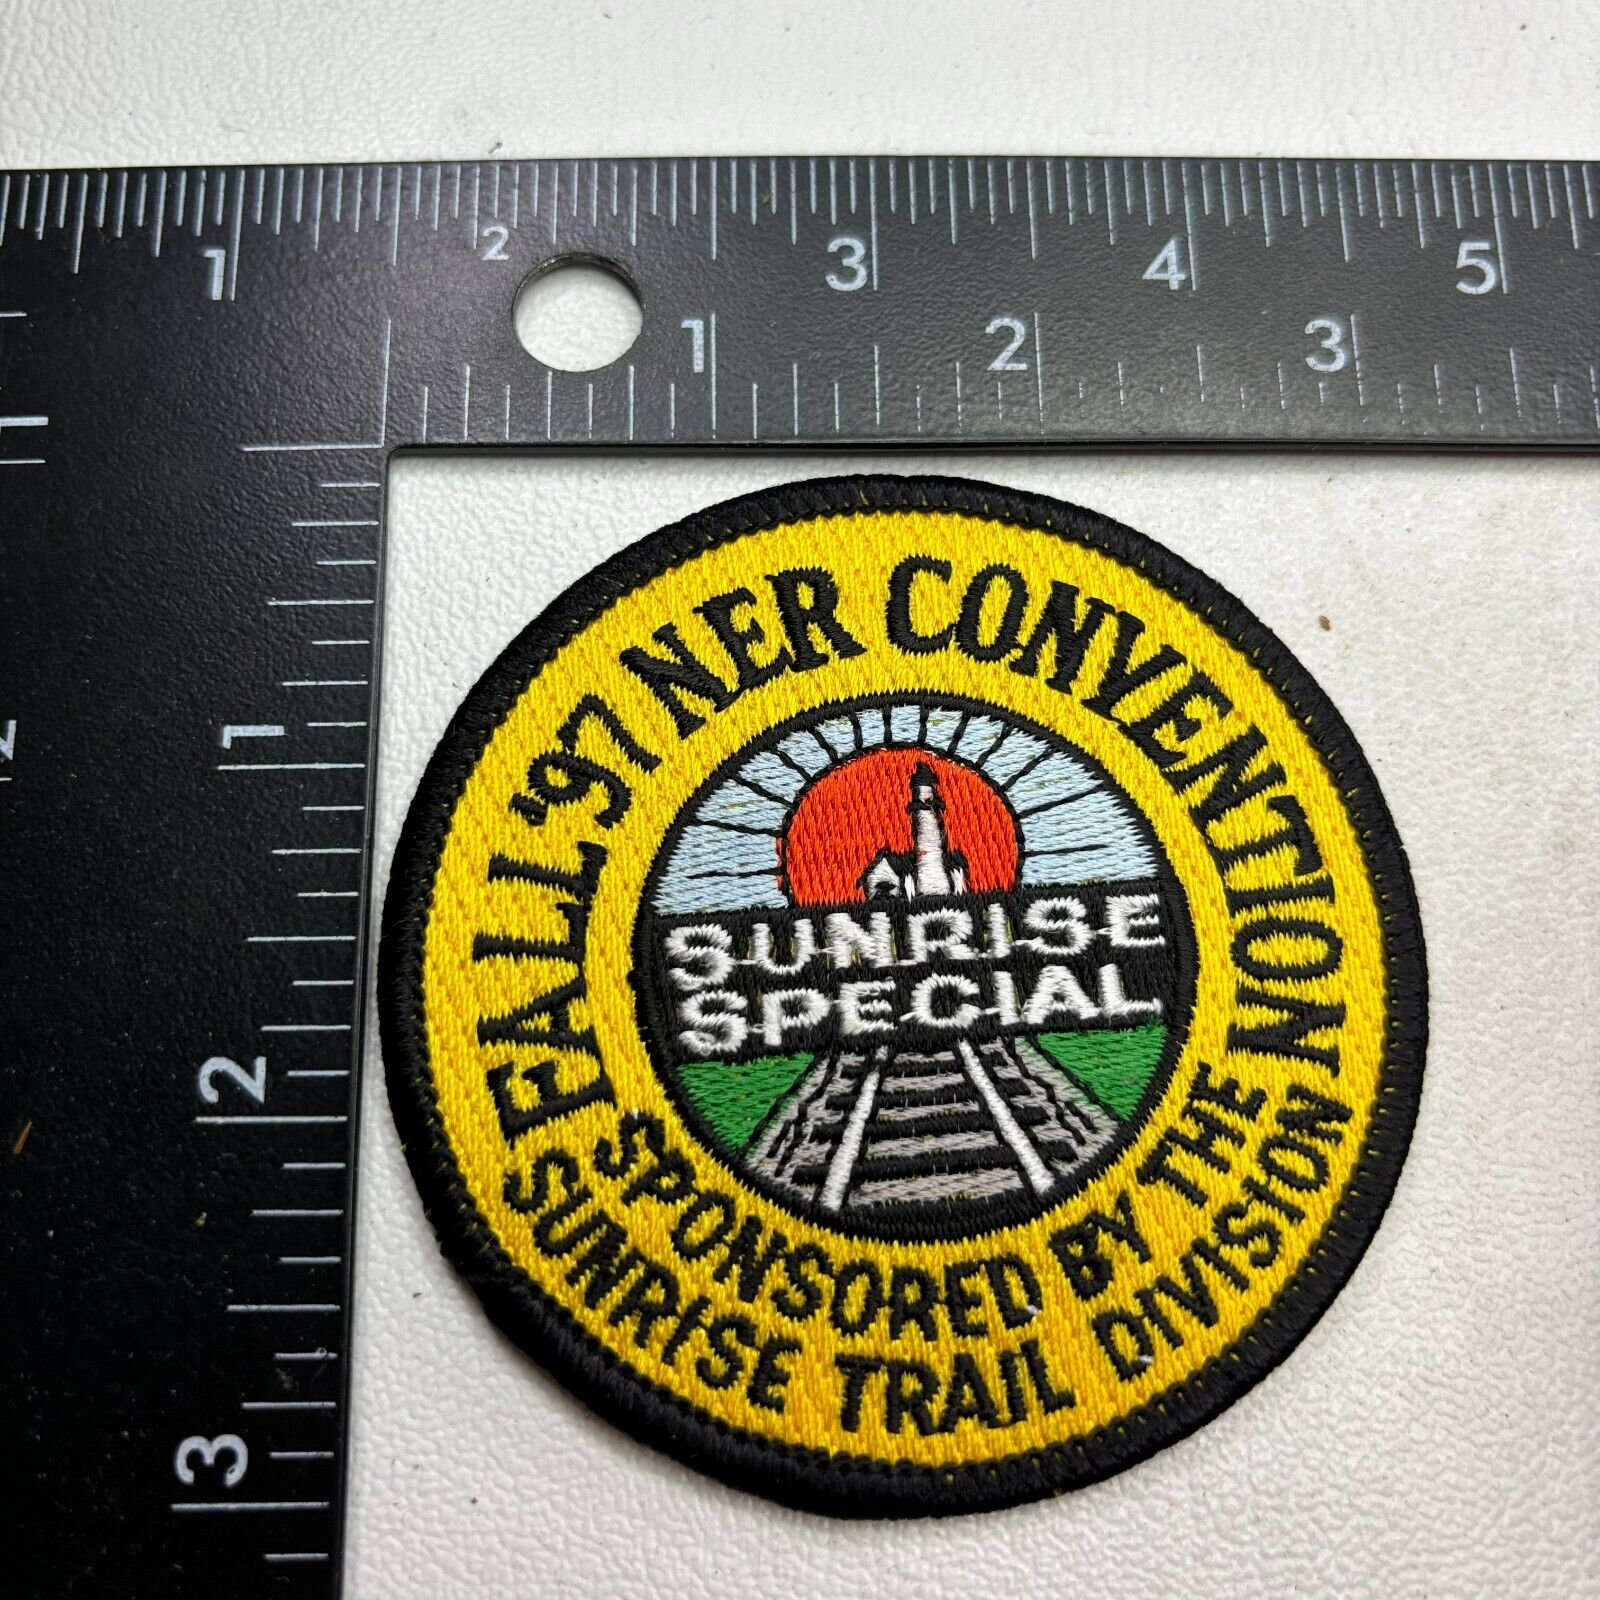 Vintage 1997 MODEL RAILROAD NER CONVENTION Patch (Railroad / Train Related) 46MZ